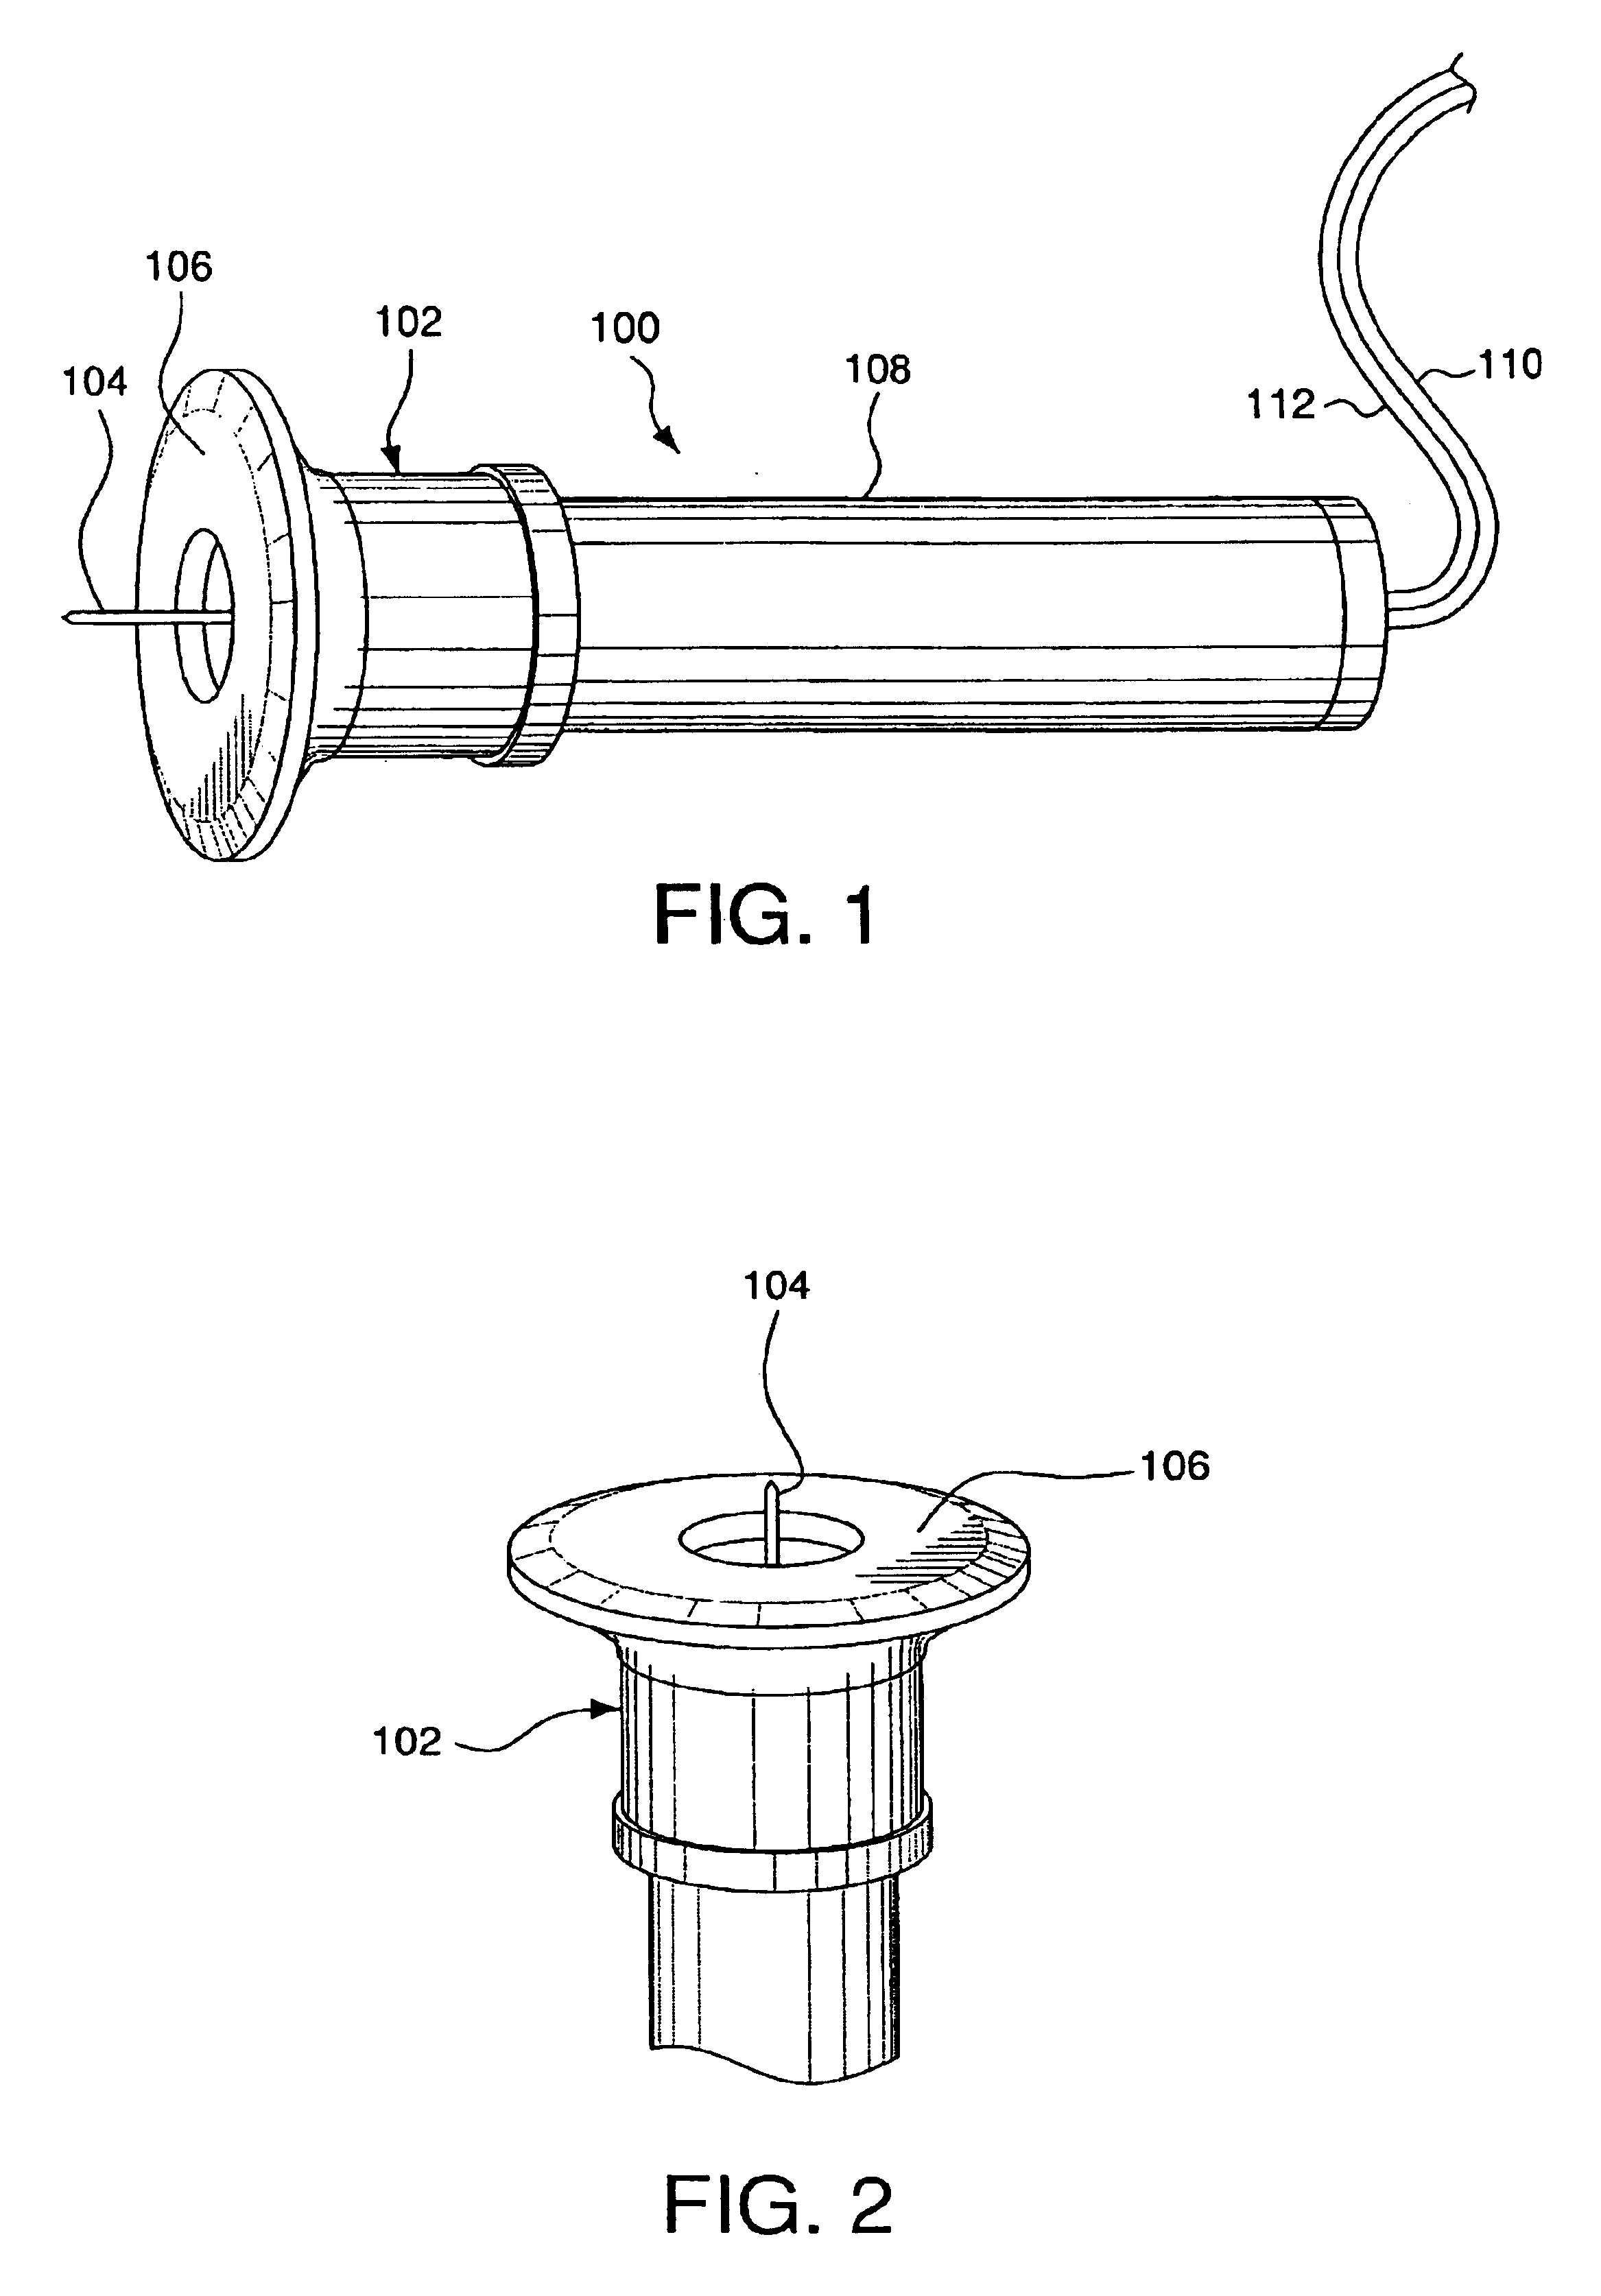 Minimally-invasive system and method for monitoring analyte levels